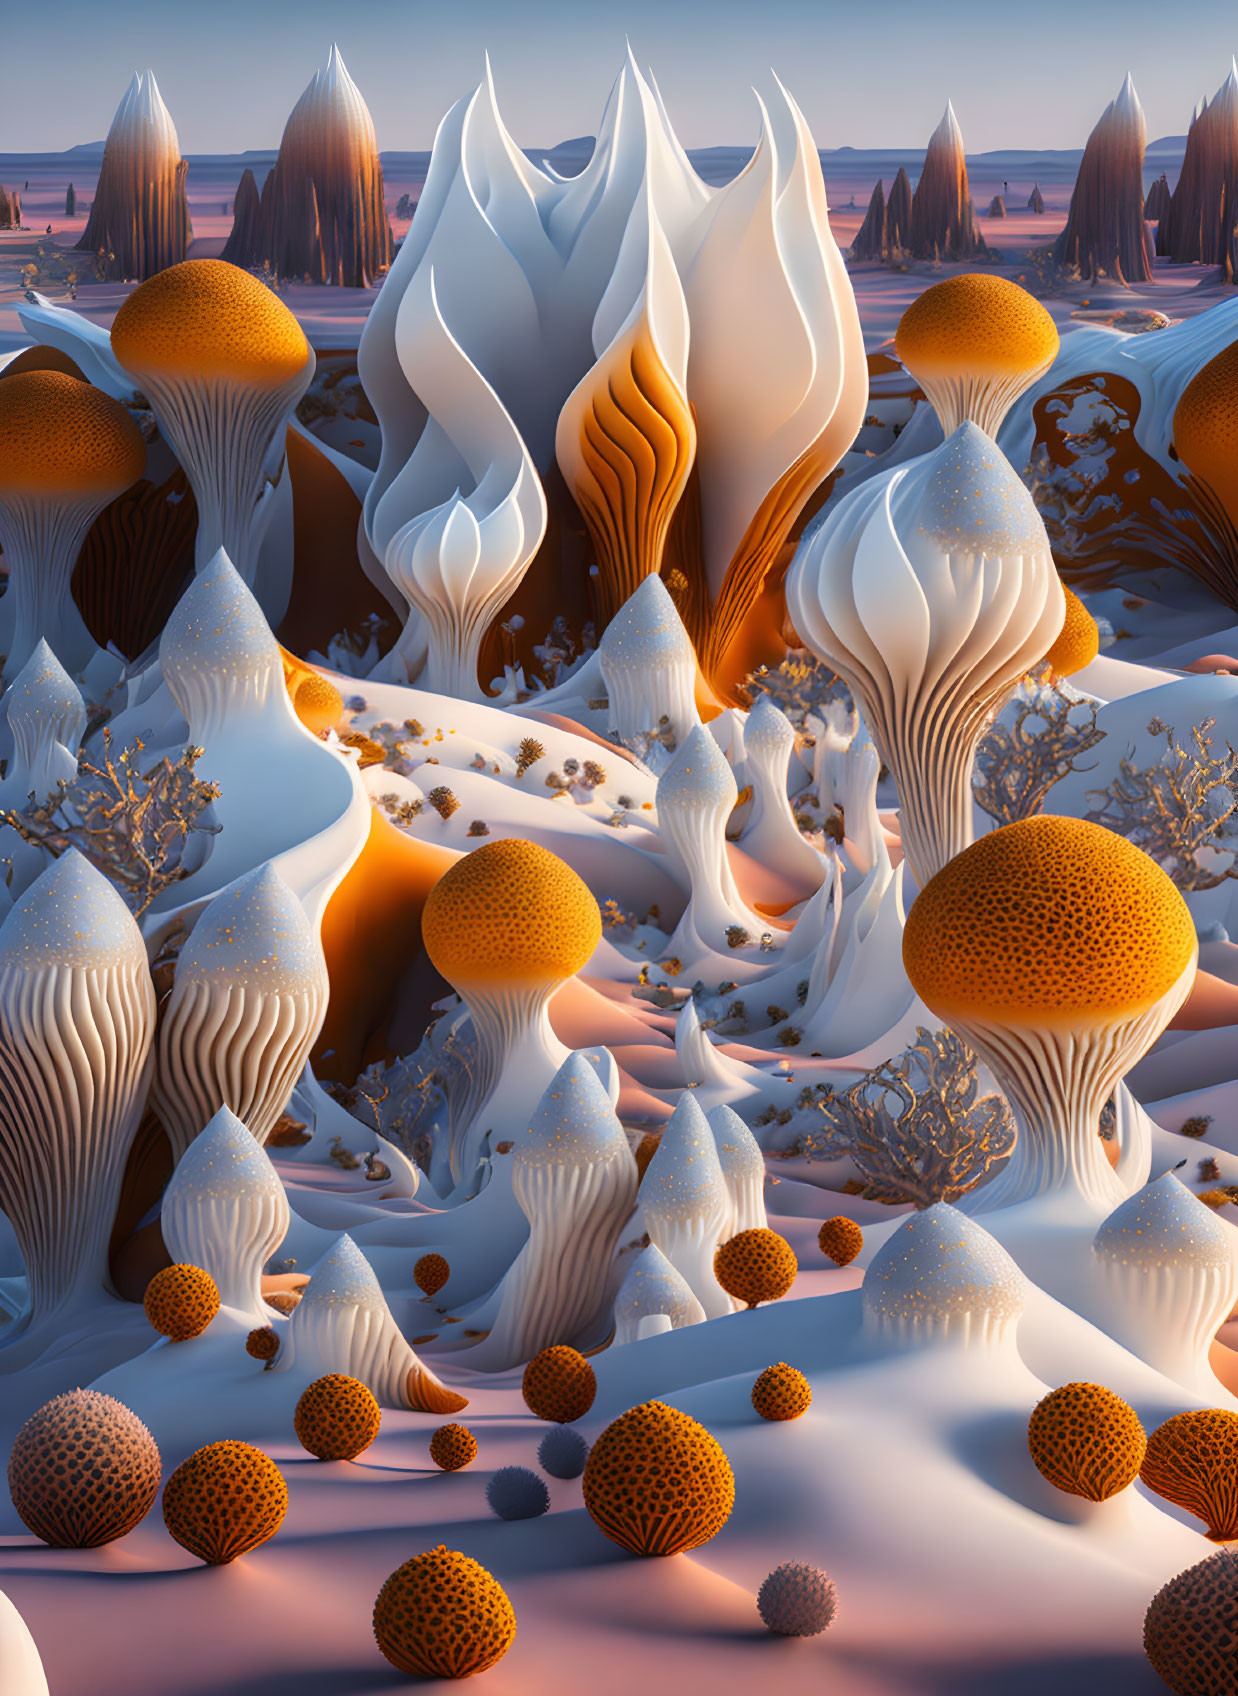 Surreal landscape with tree-like structures and mushroom formations under soft glowing light